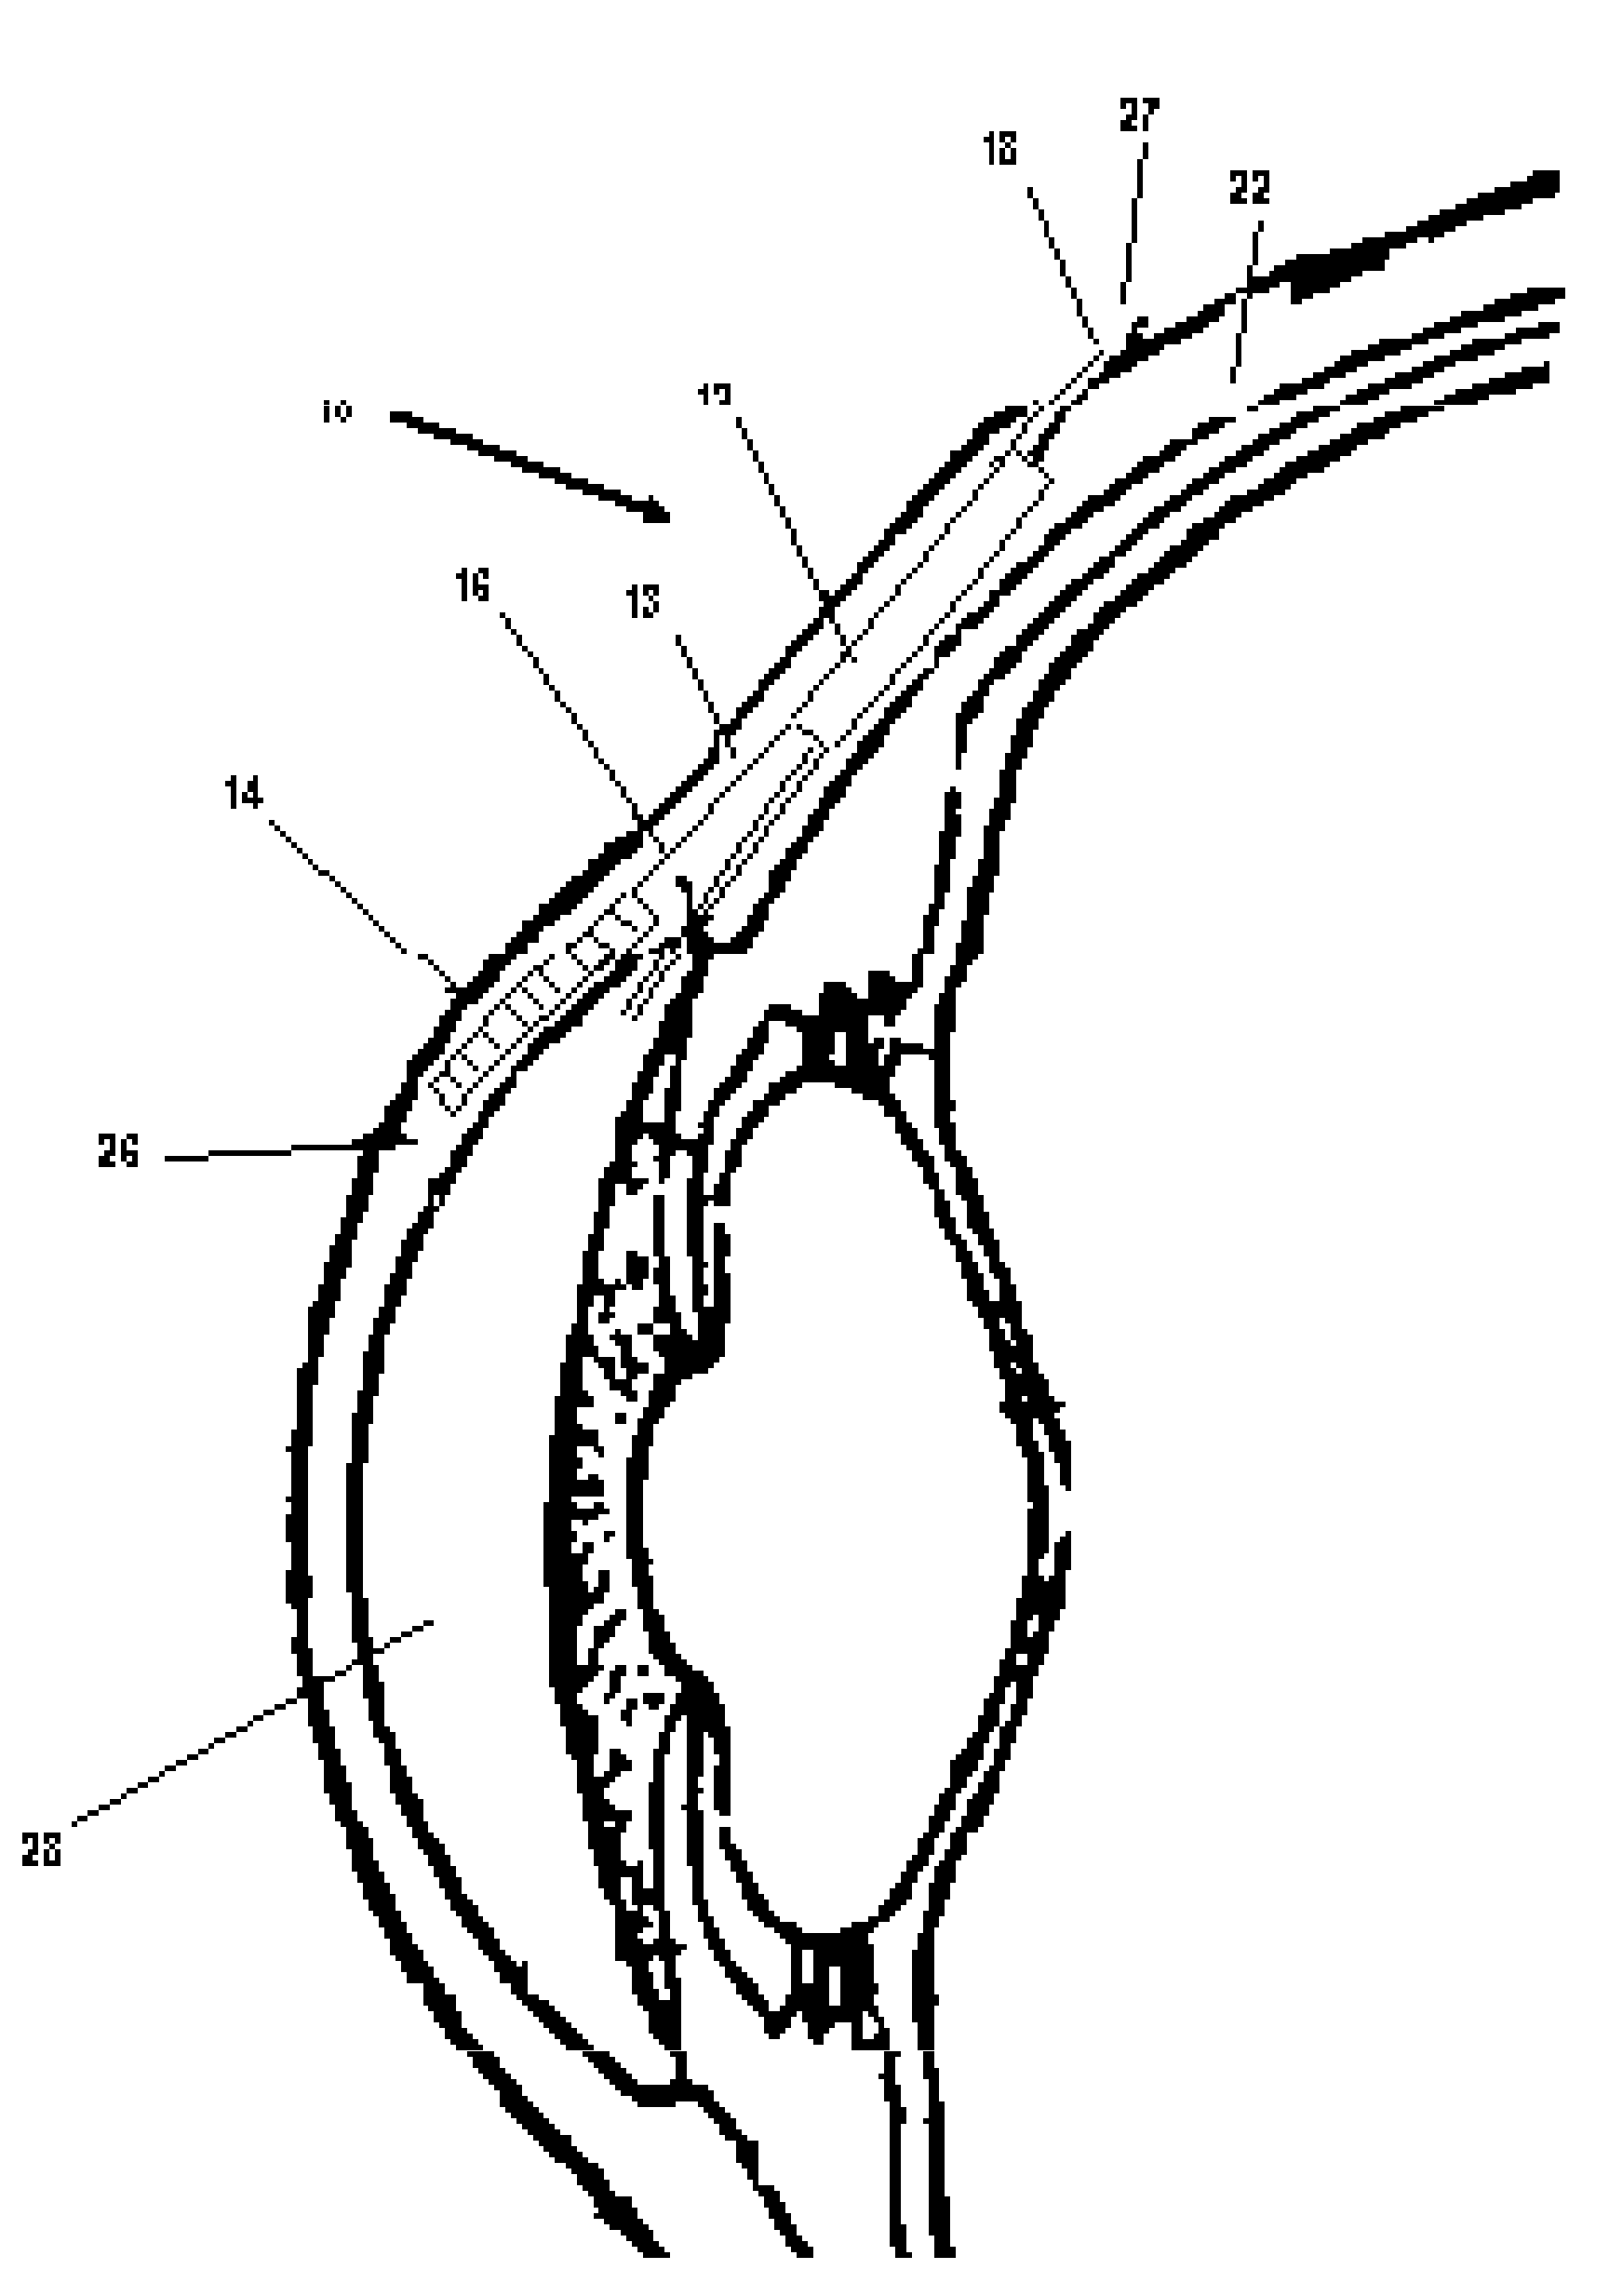 Apparatus and method for lowering intraocular pressure in an eye